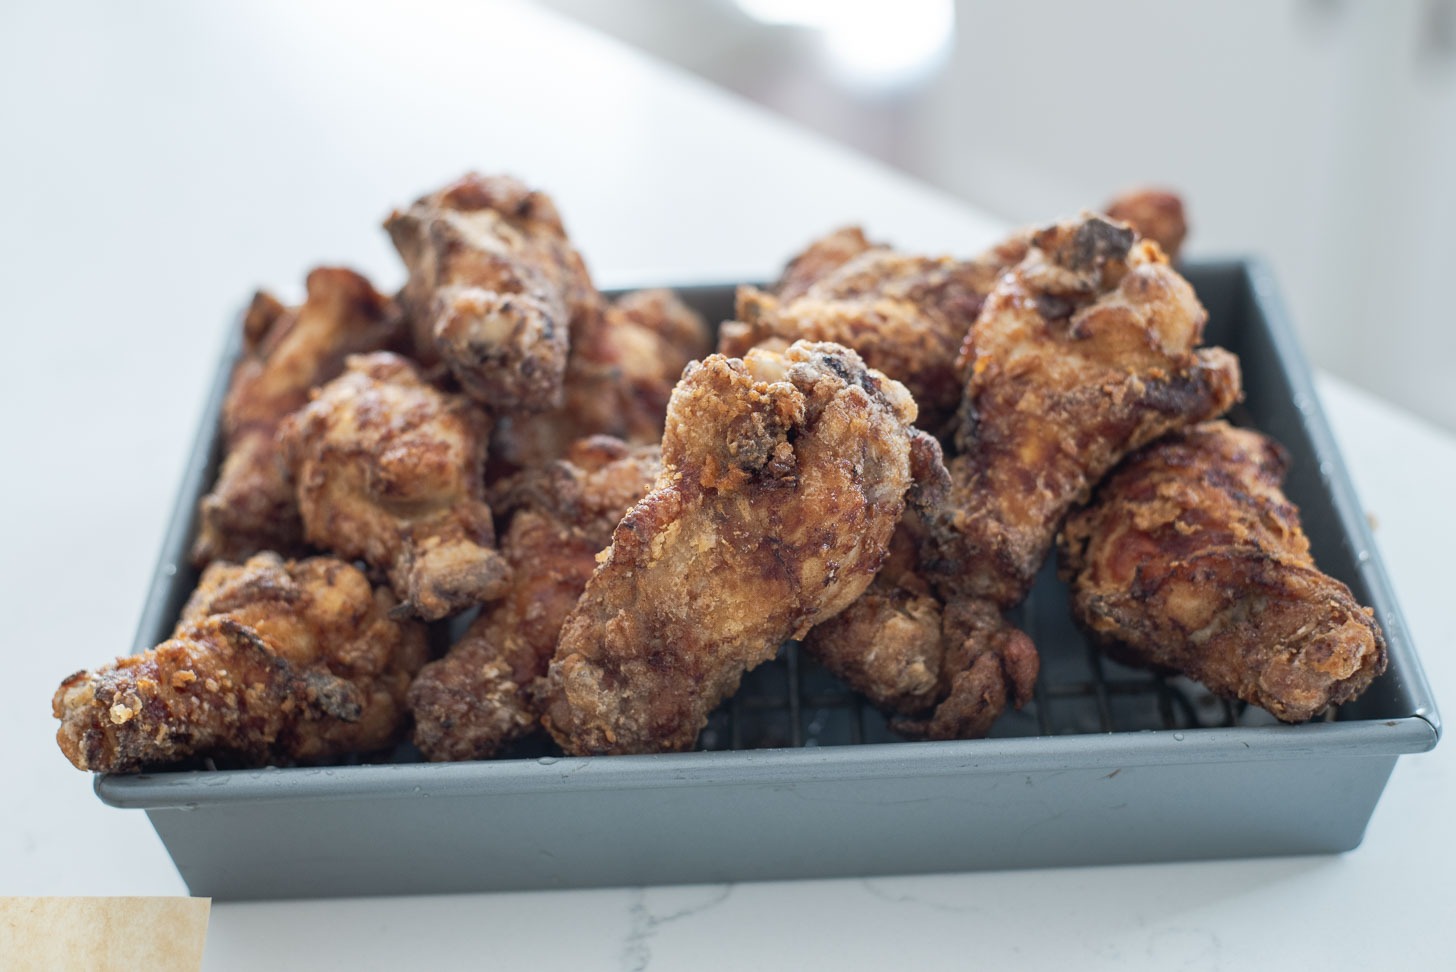 Double deep-fried chicken wings are golden brown and crisp.